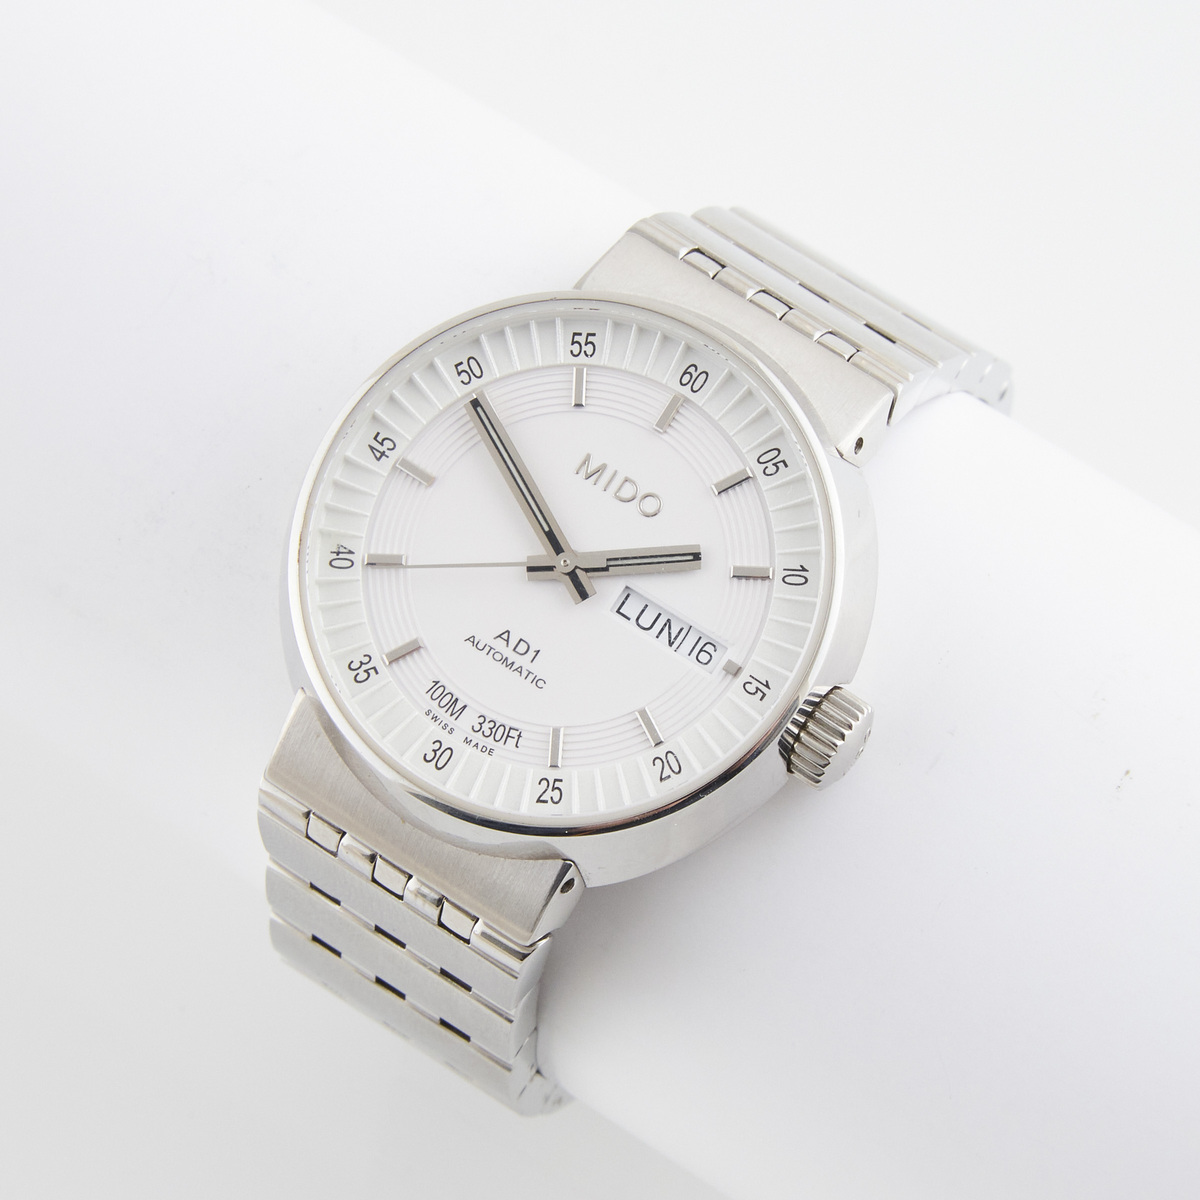 Mido 'All Dial' Wristwatch, With Day & Date, circa 2010; reference M8330; case #14HA0170087; 39mm; 2